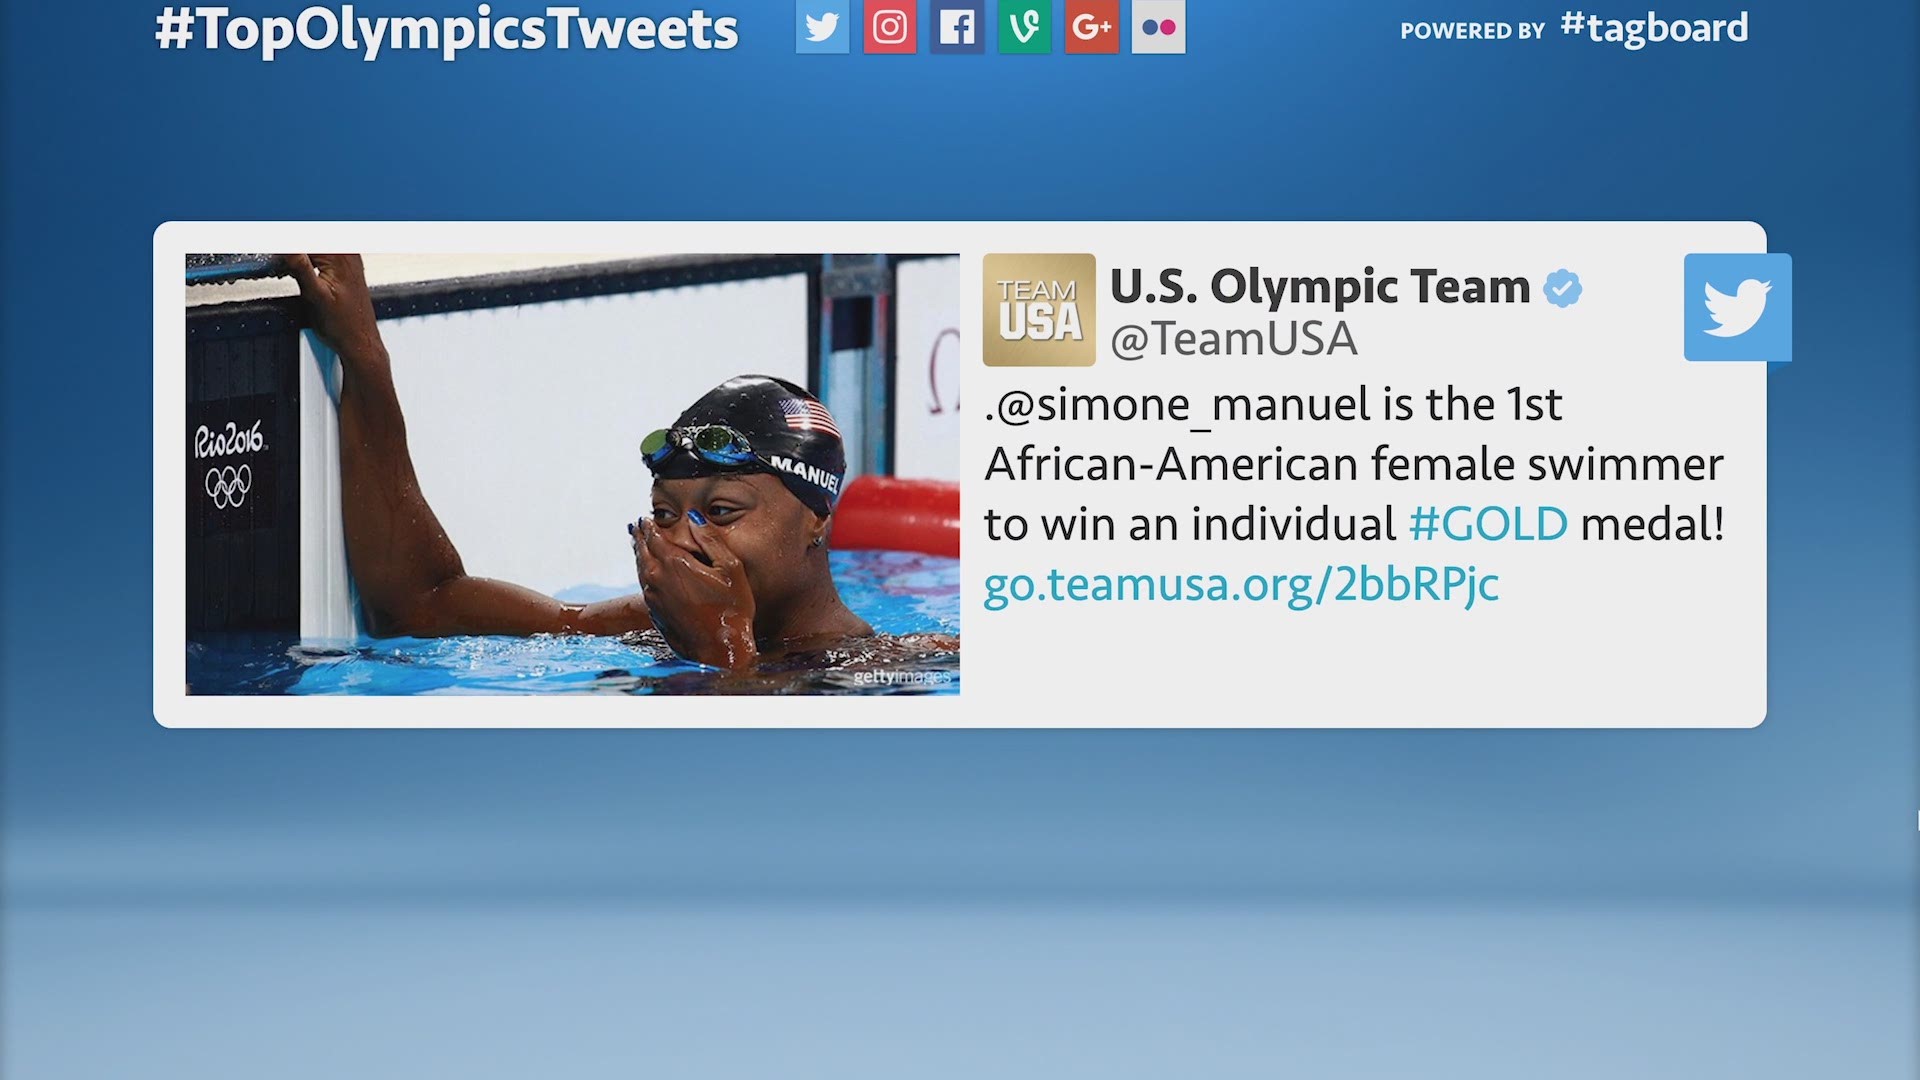 Some of the most memorable Olympics moments were re-Tweeted and favorited thousands of times on Twitter. Here are some of the social network's top Tweets from the games.